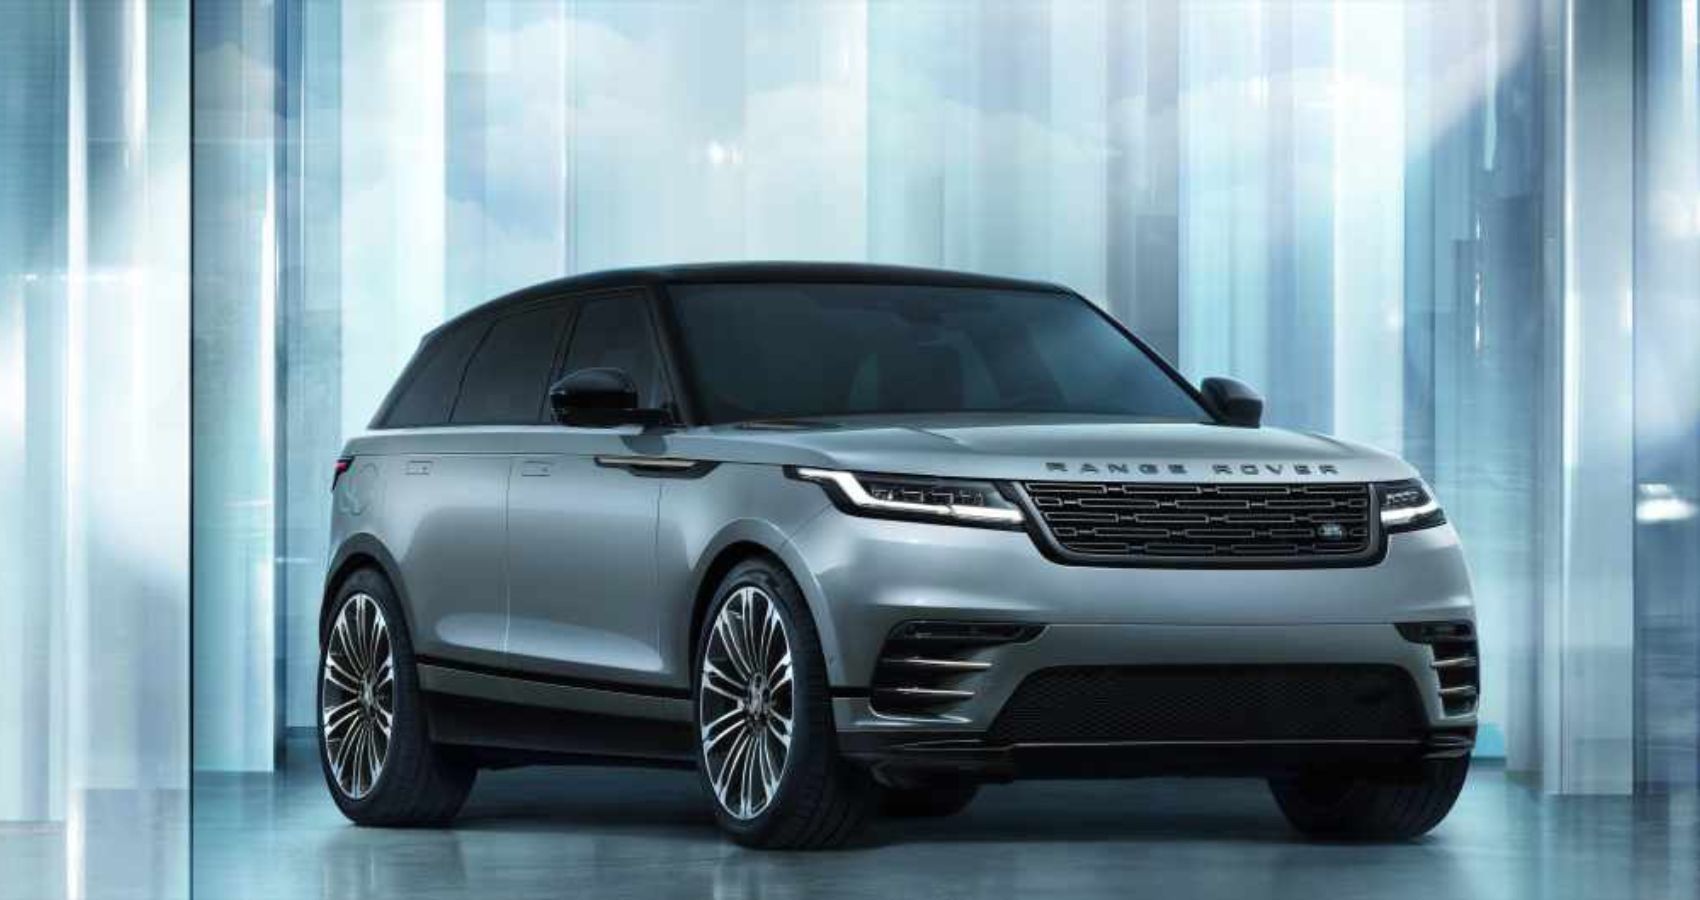 Front view of the 2024 Range Rover Velar.